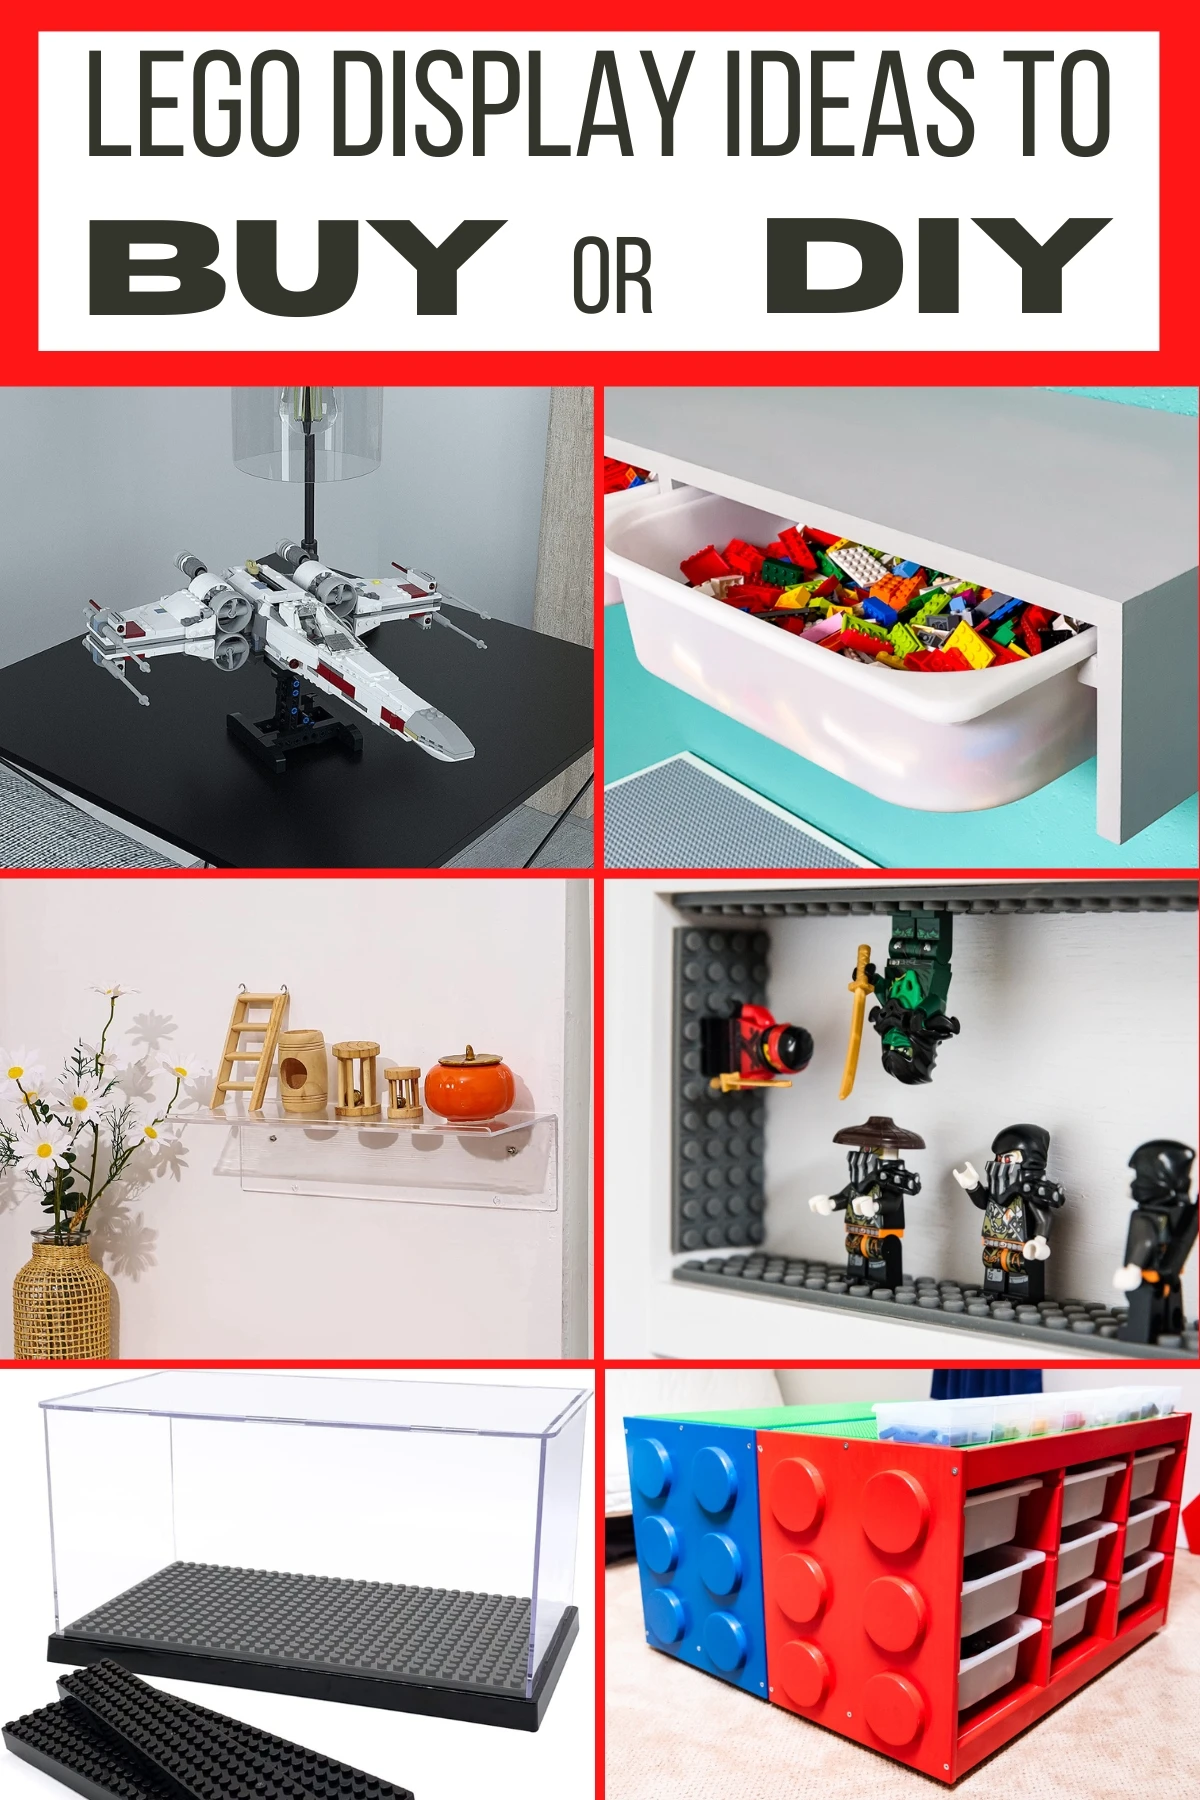 https://www.thehandymansdaughter.com/wp-content/uploads/2022/12/Lego-Display-Ideas-to-buy-or-DIY-Pin-1.jpeg.webp